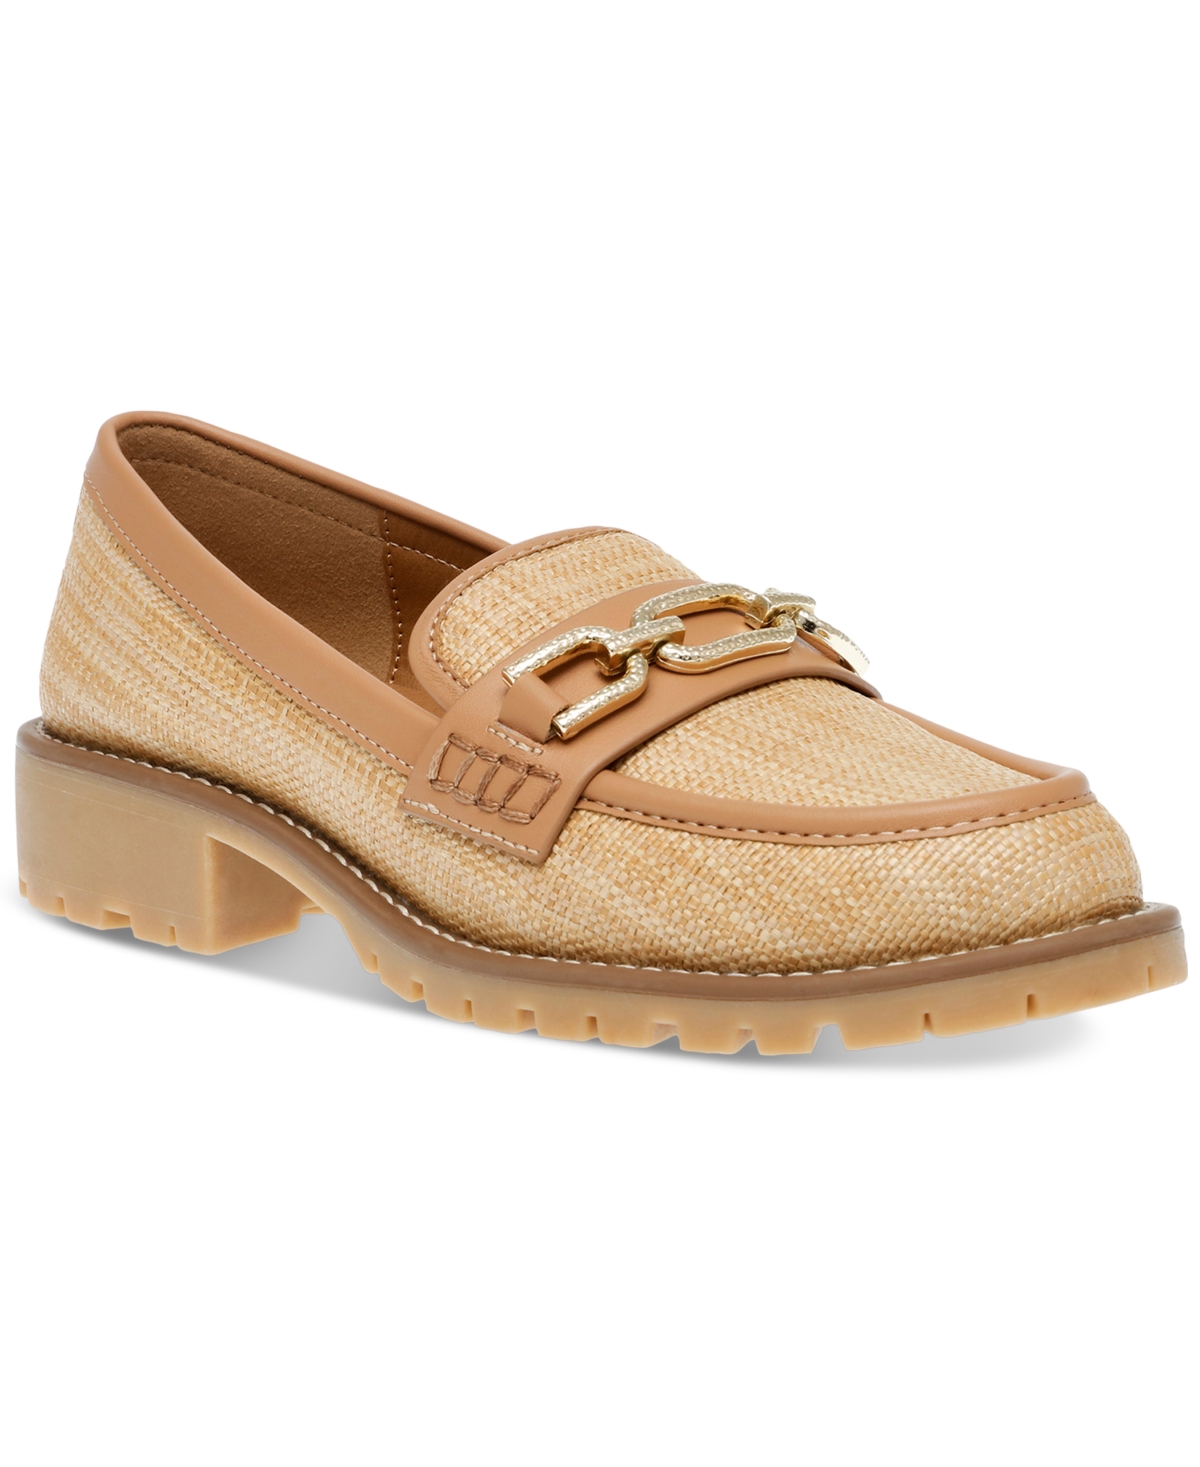 Women's Crayn Tailored Hardware Lug Sole Loafers - Natural Raffia